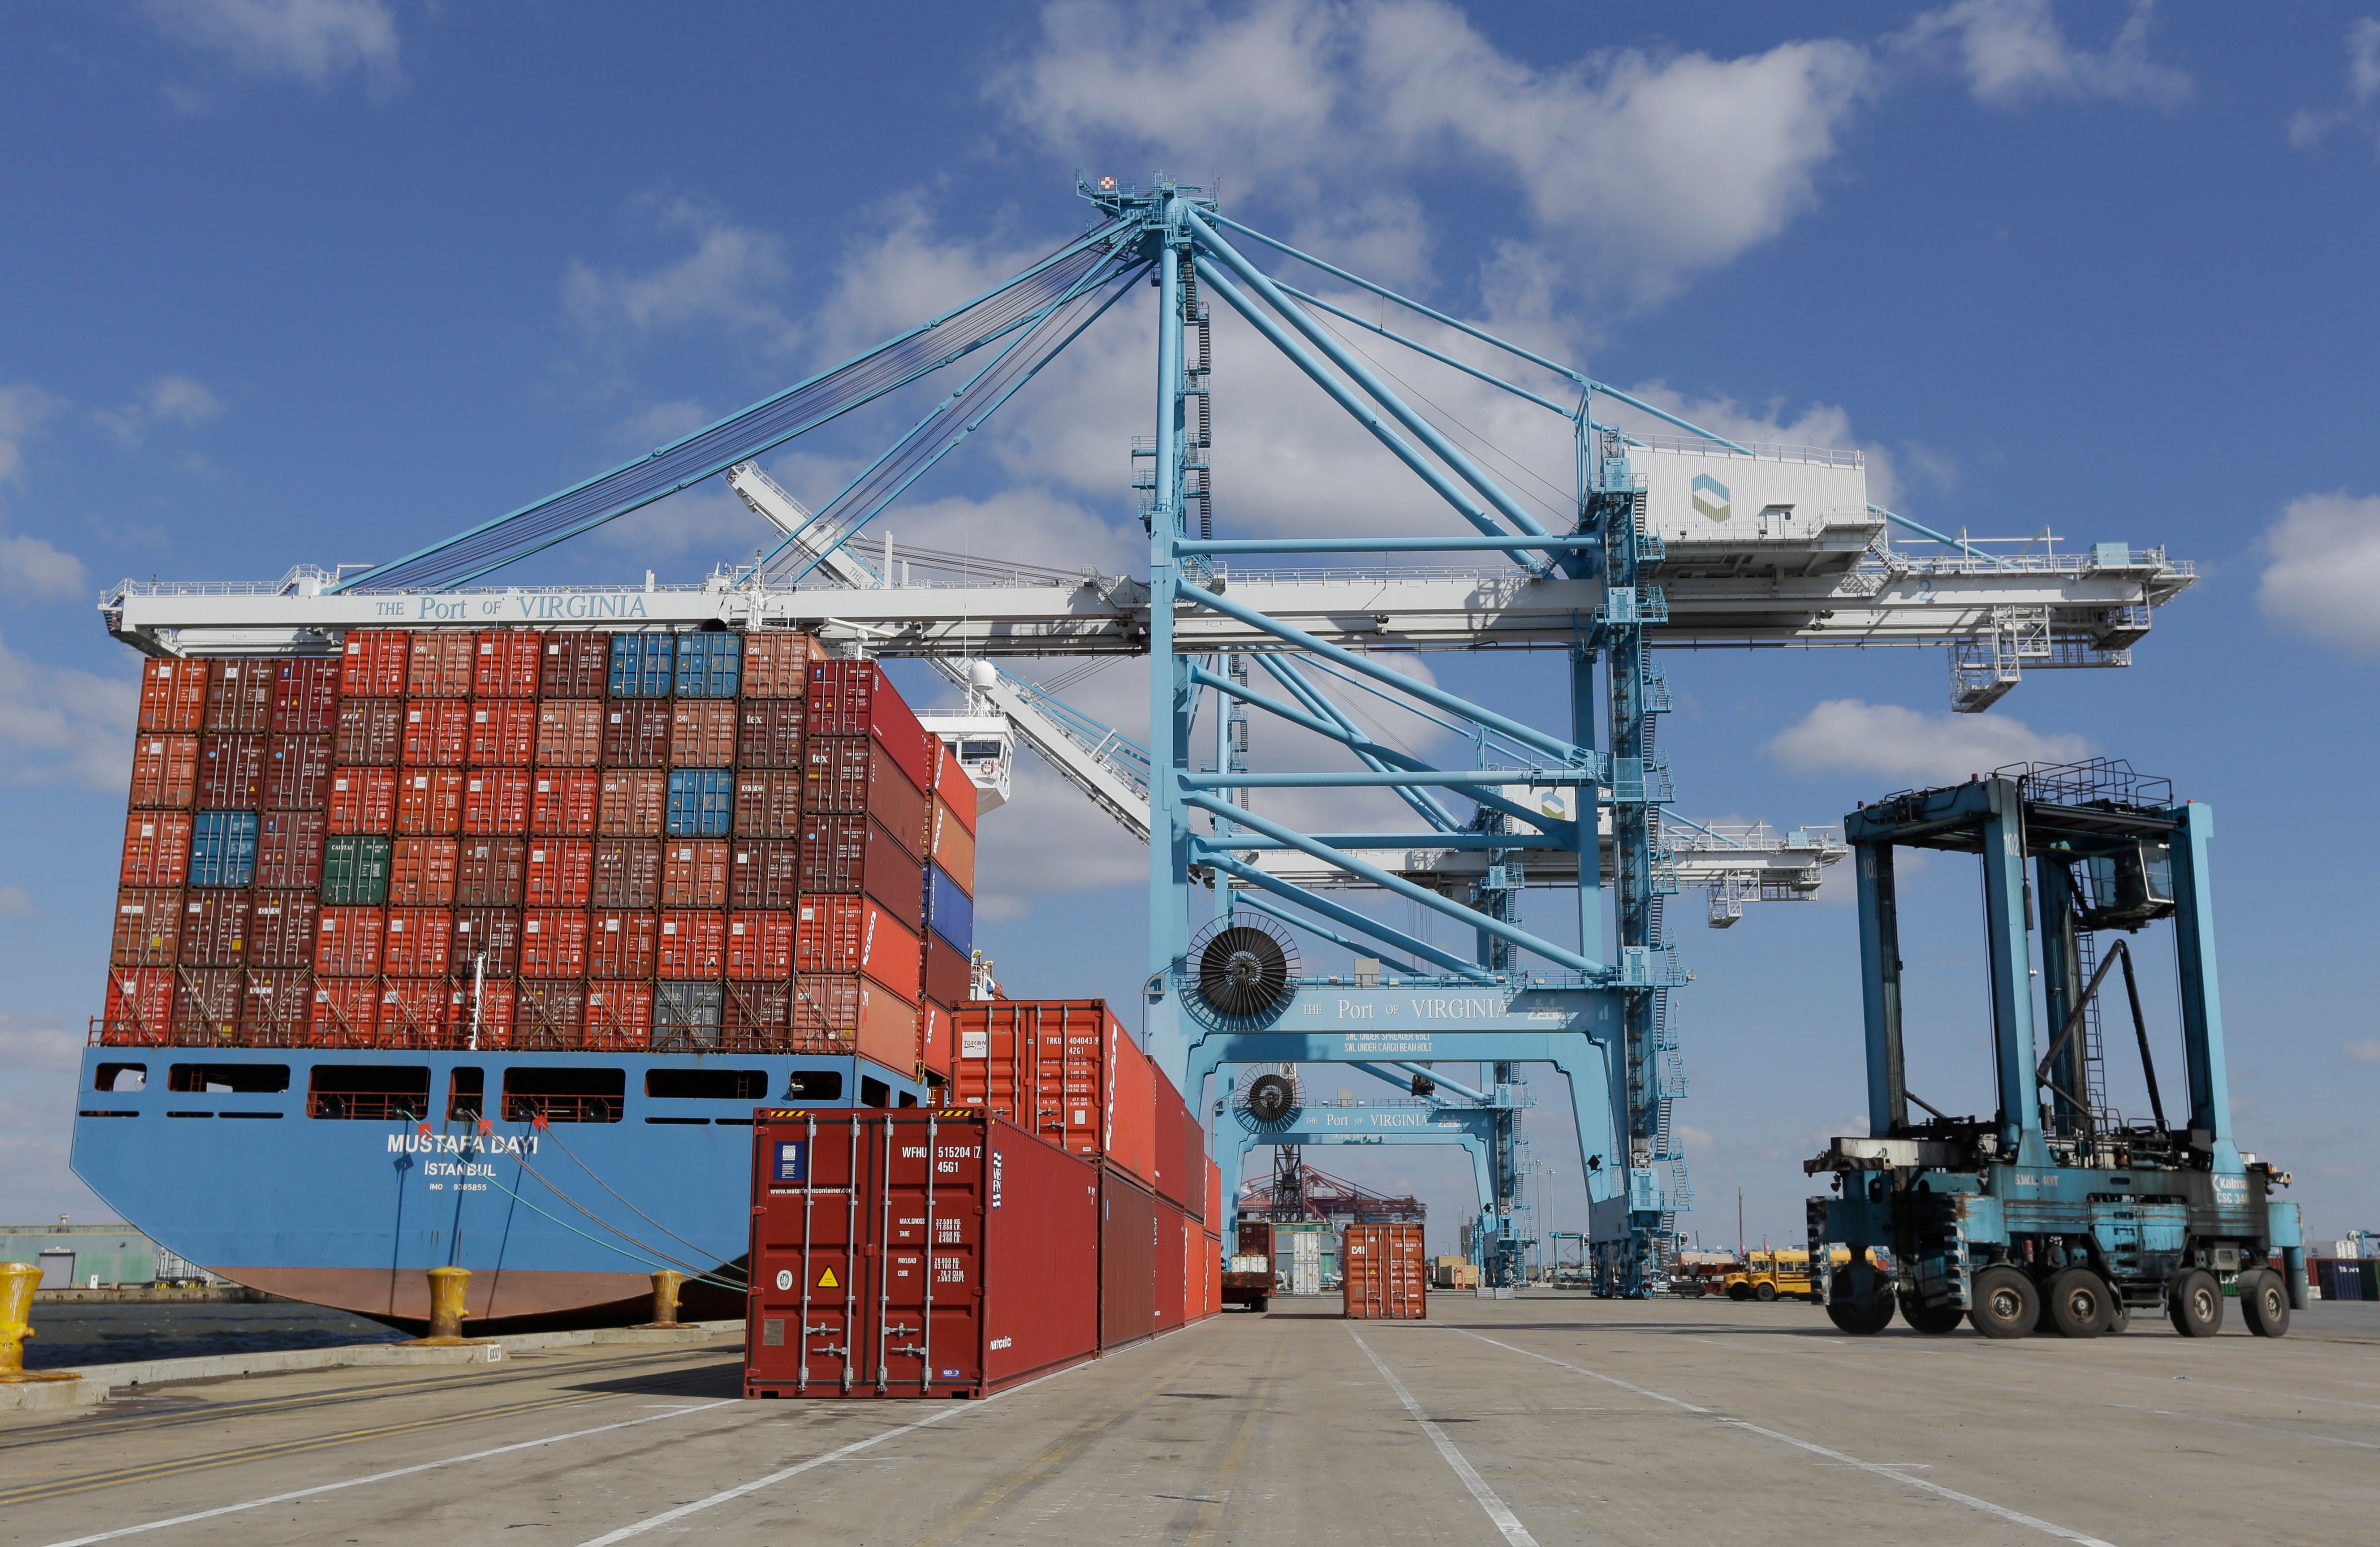 A rail mounted gantry crane, center, as well as a Straddle Carrier, right, used to unload and load a container ship at the Norfolk International Terminal in Norfolk, Va. on March 26, 2014. (Steve Helber—AP)